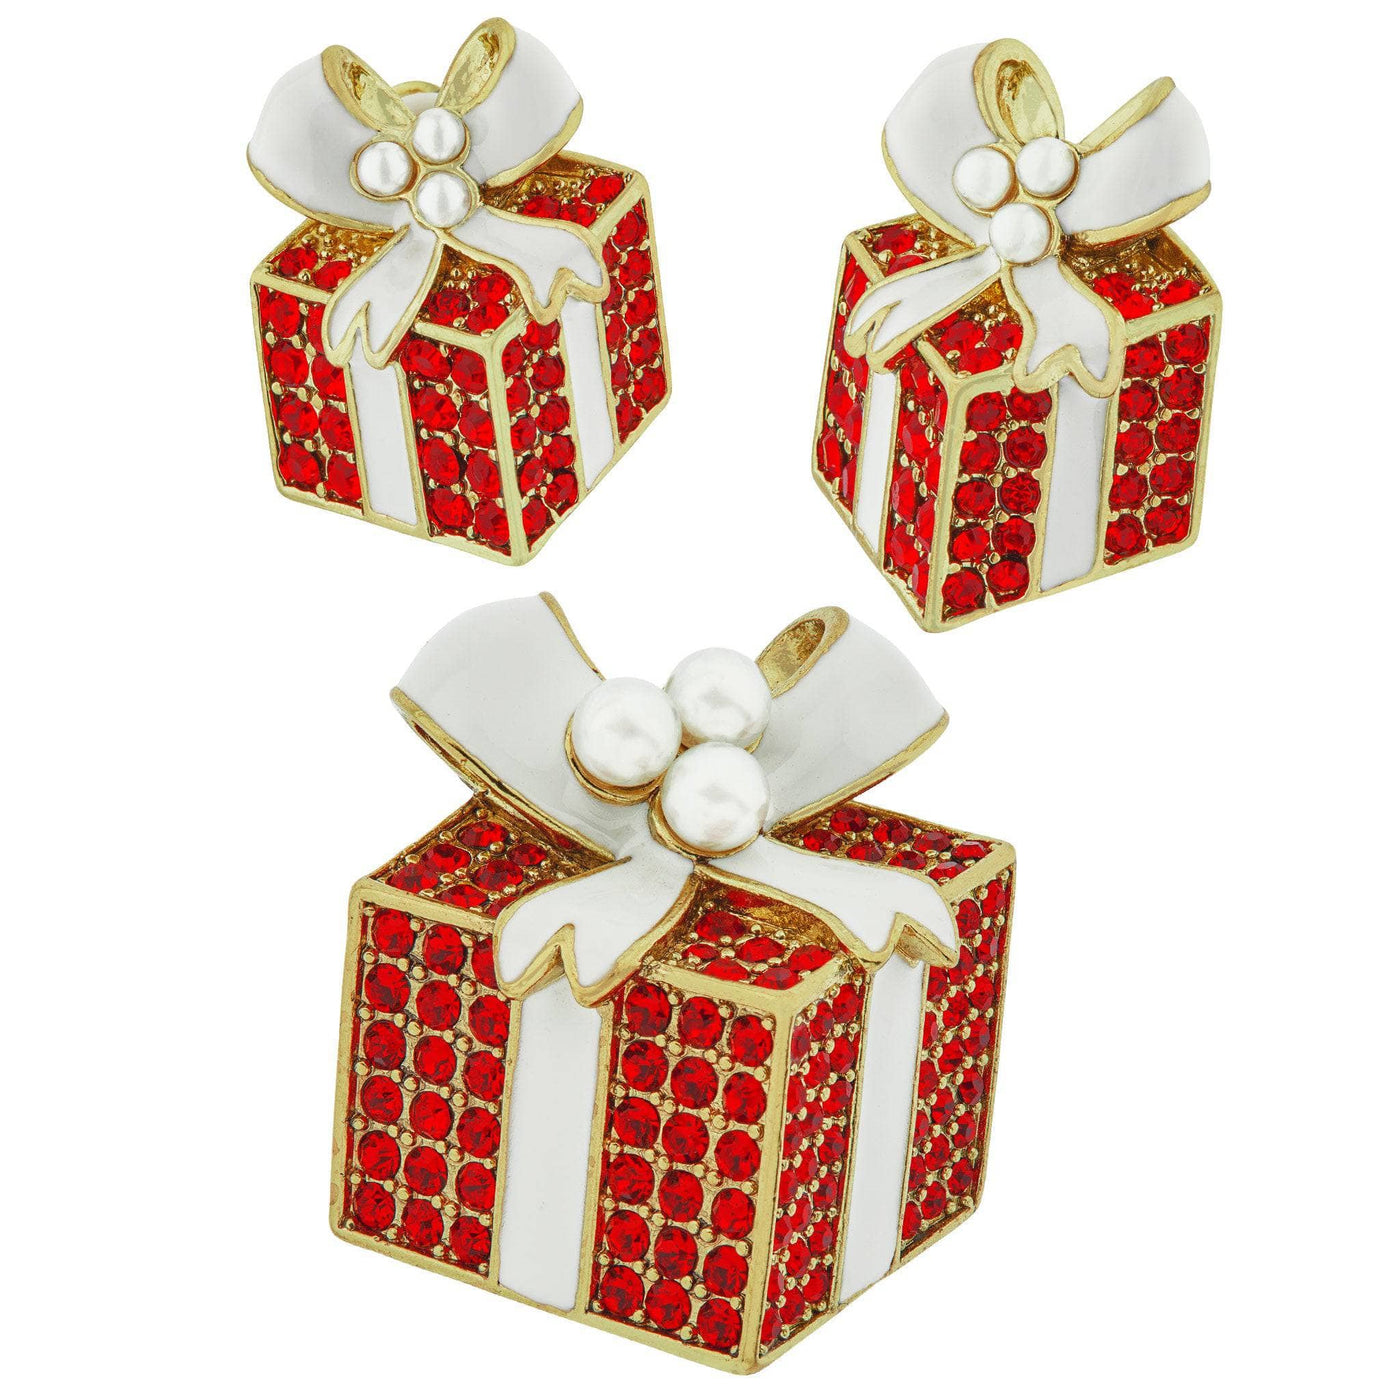 HEIDI DAUS®"Today Is a Gift" Enamel Beaded Crystal Gift Box Pin and Earrings Set